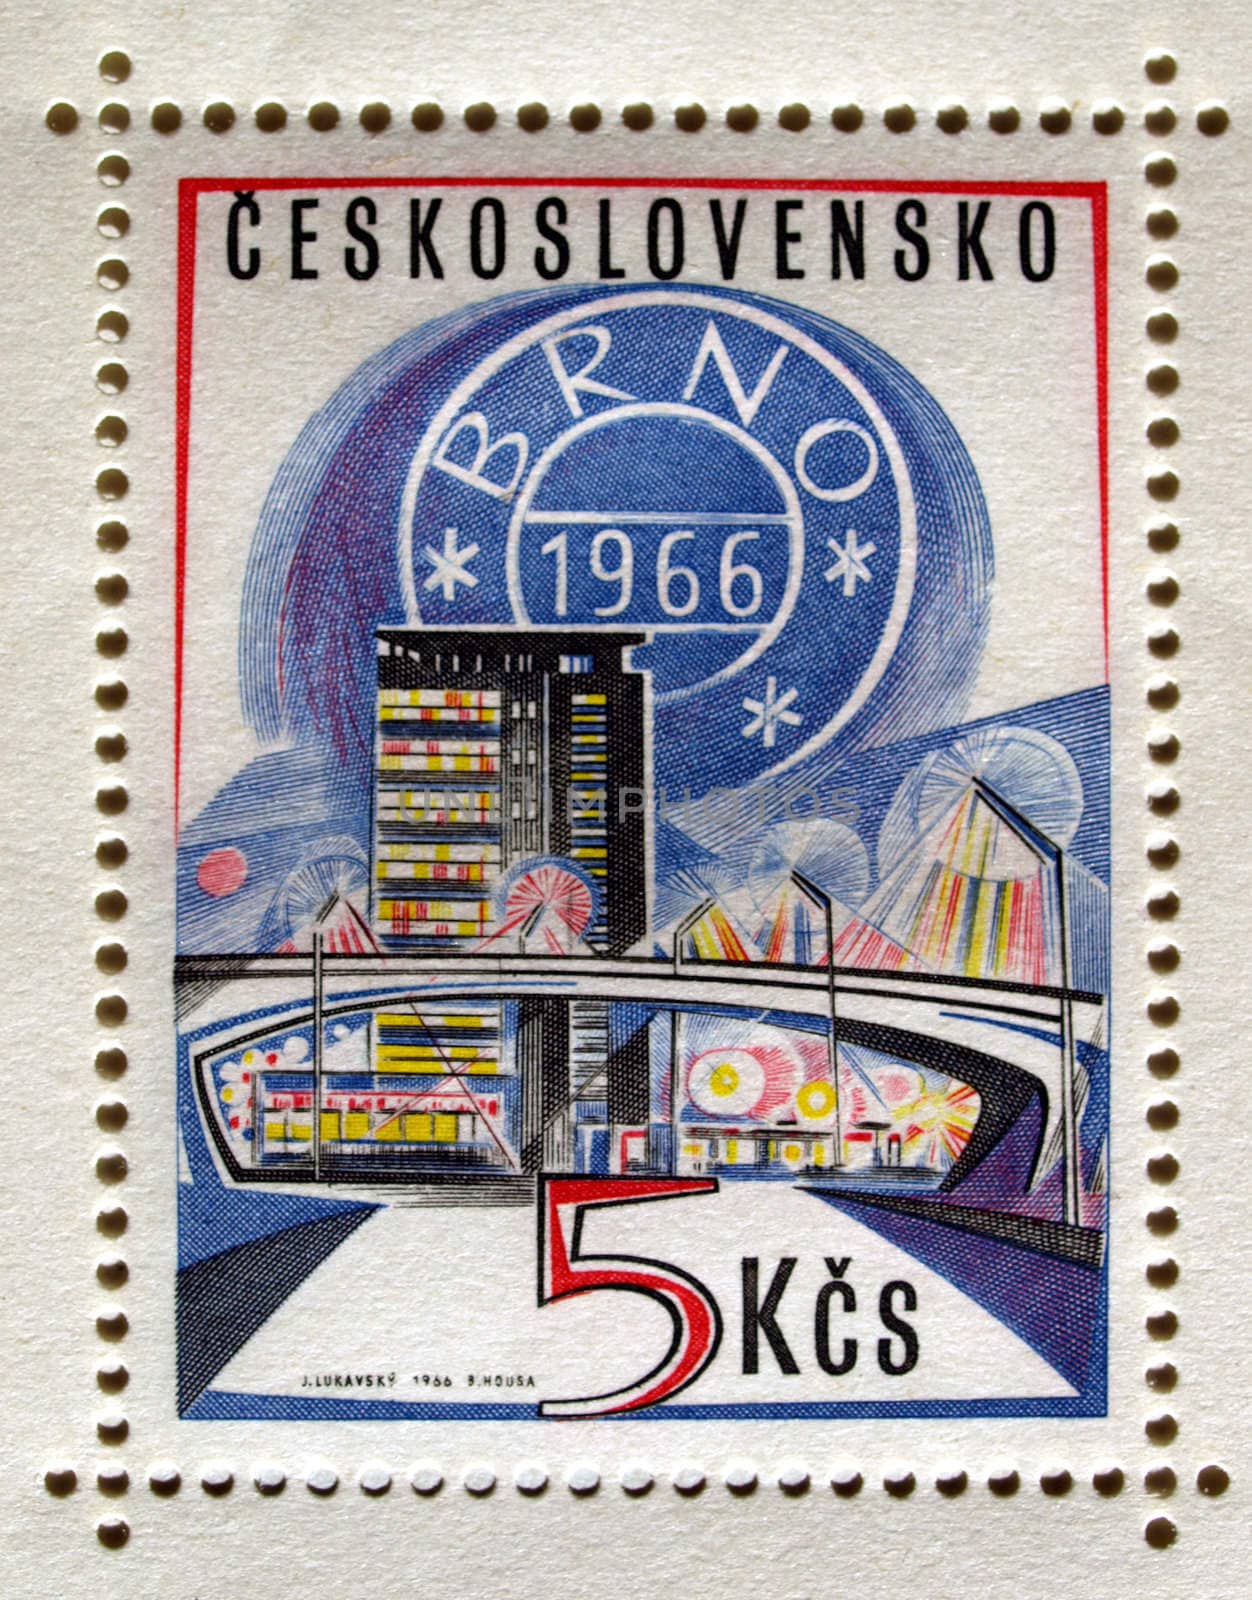 Detail of Czech Republic mail postage stamp